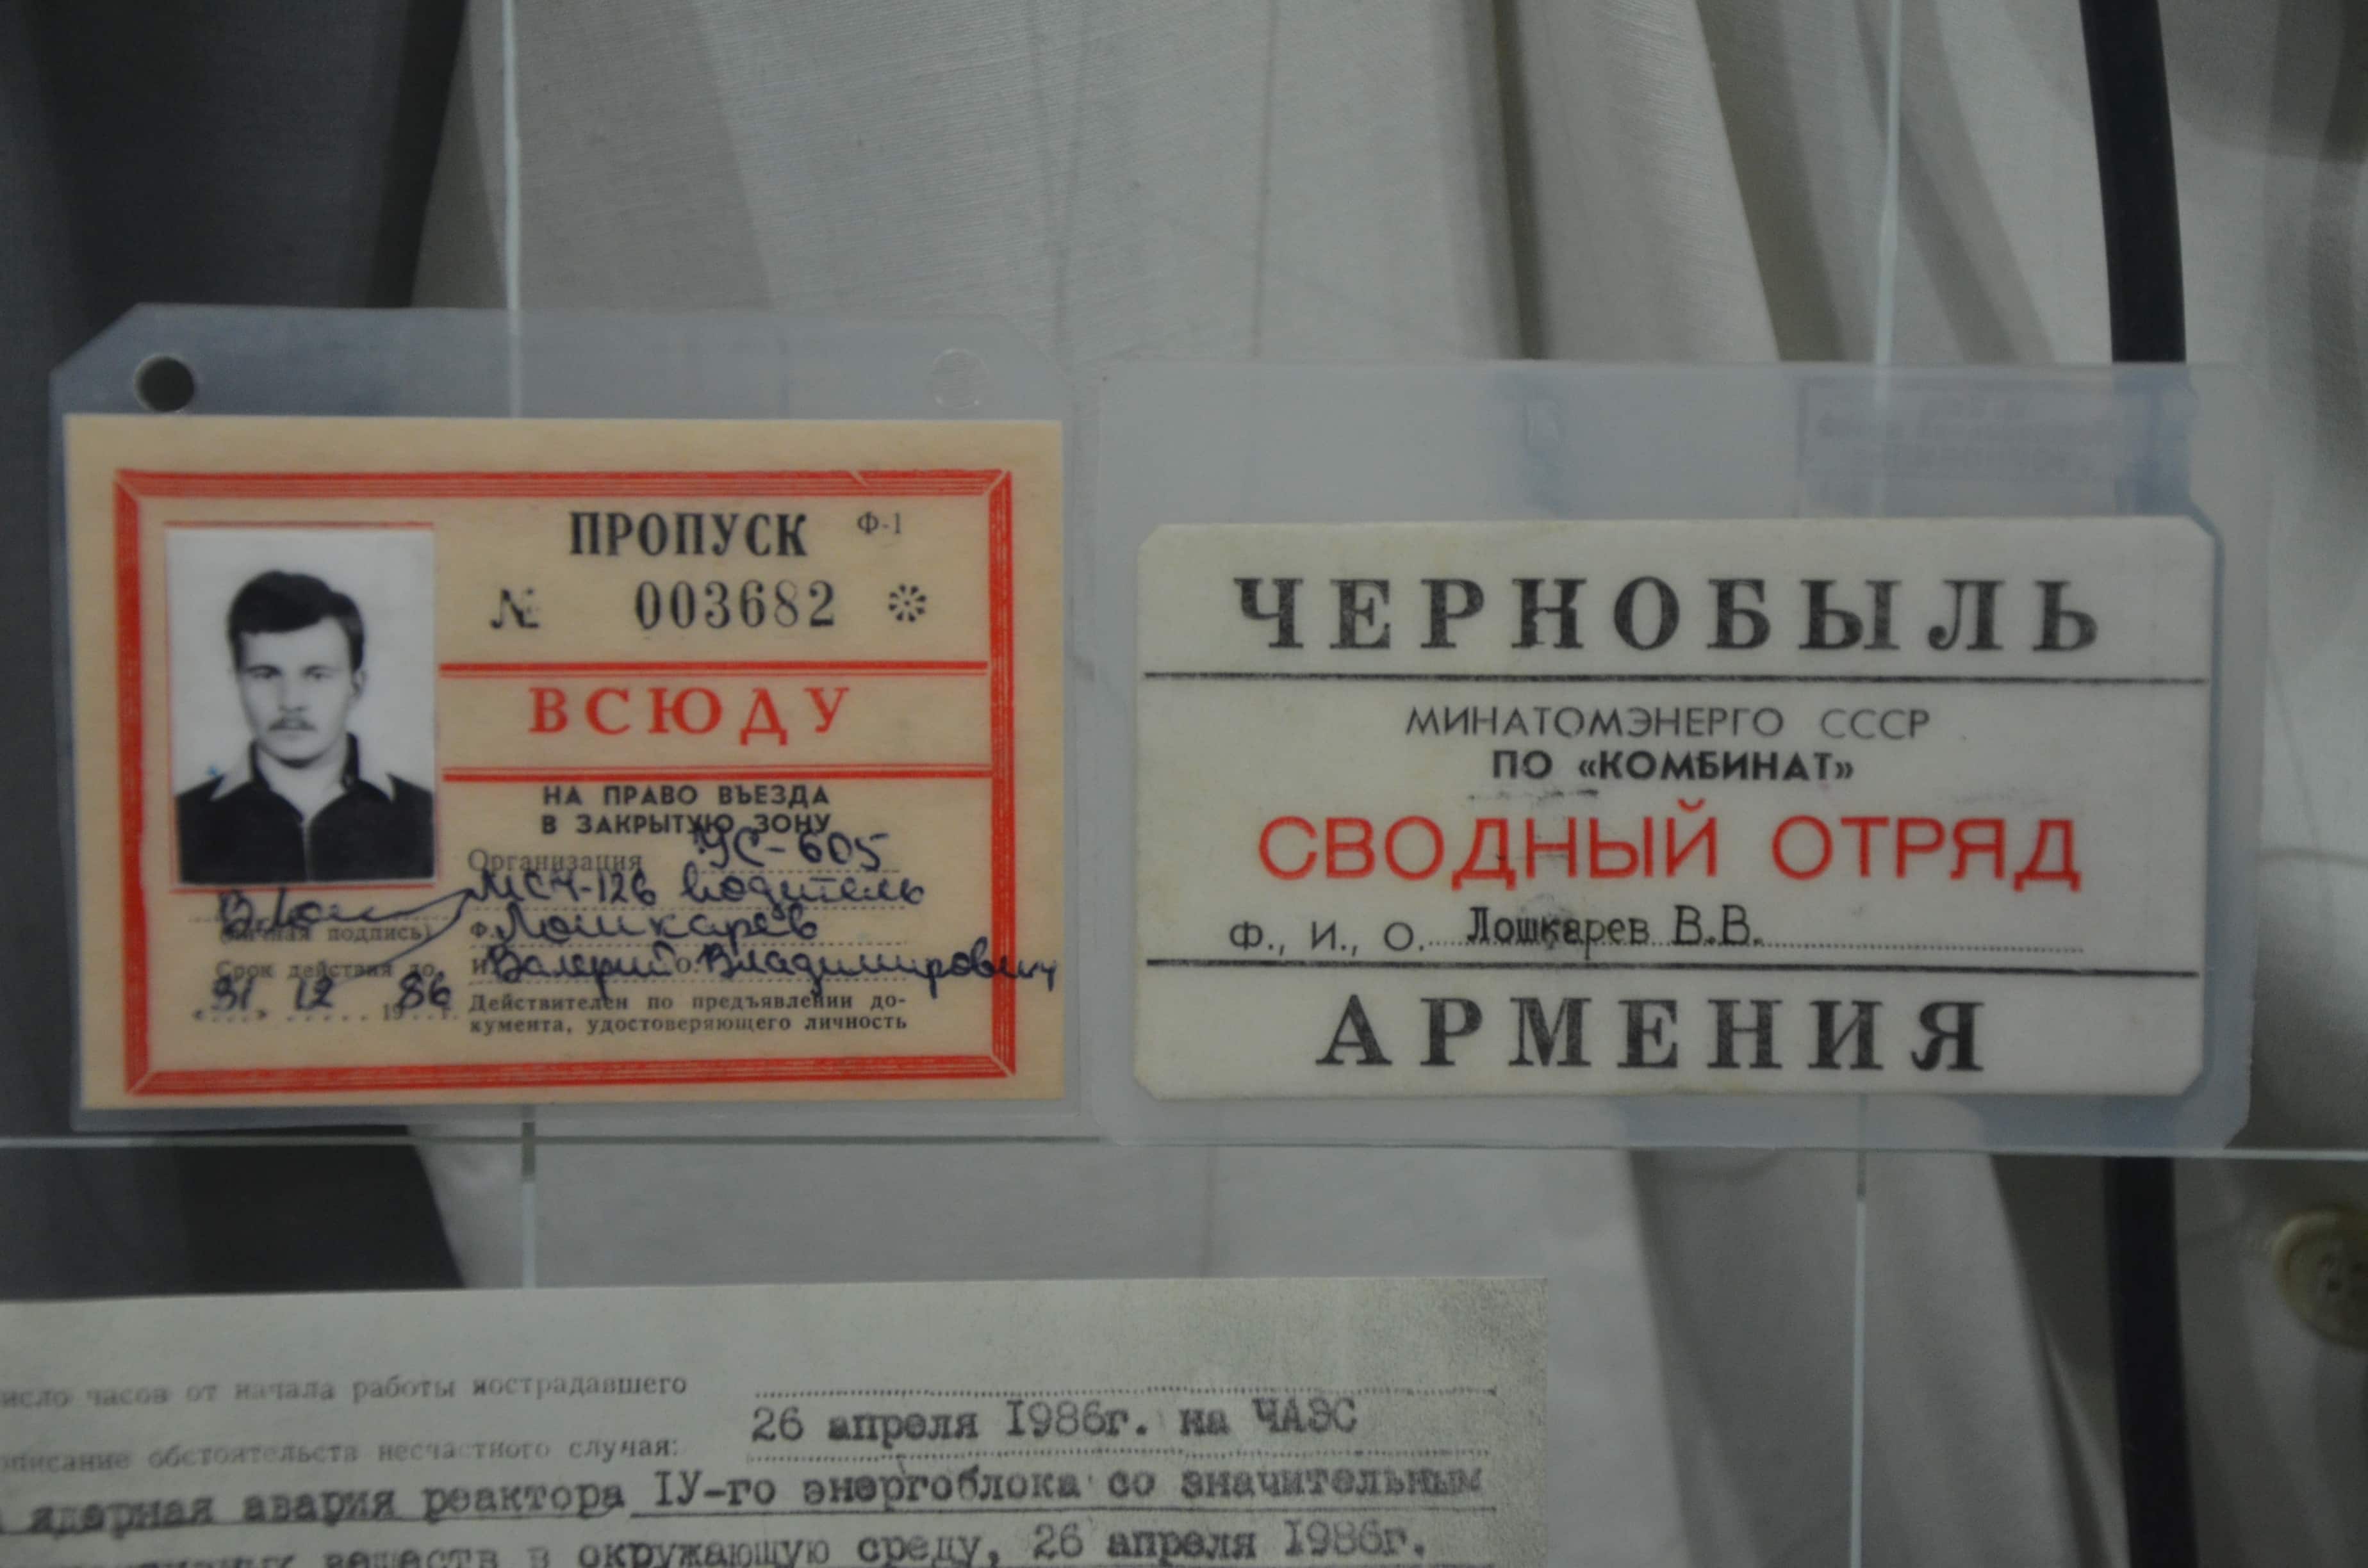 ID of a first responder at the Chernobyl Museum in Kyiv, Ukraine